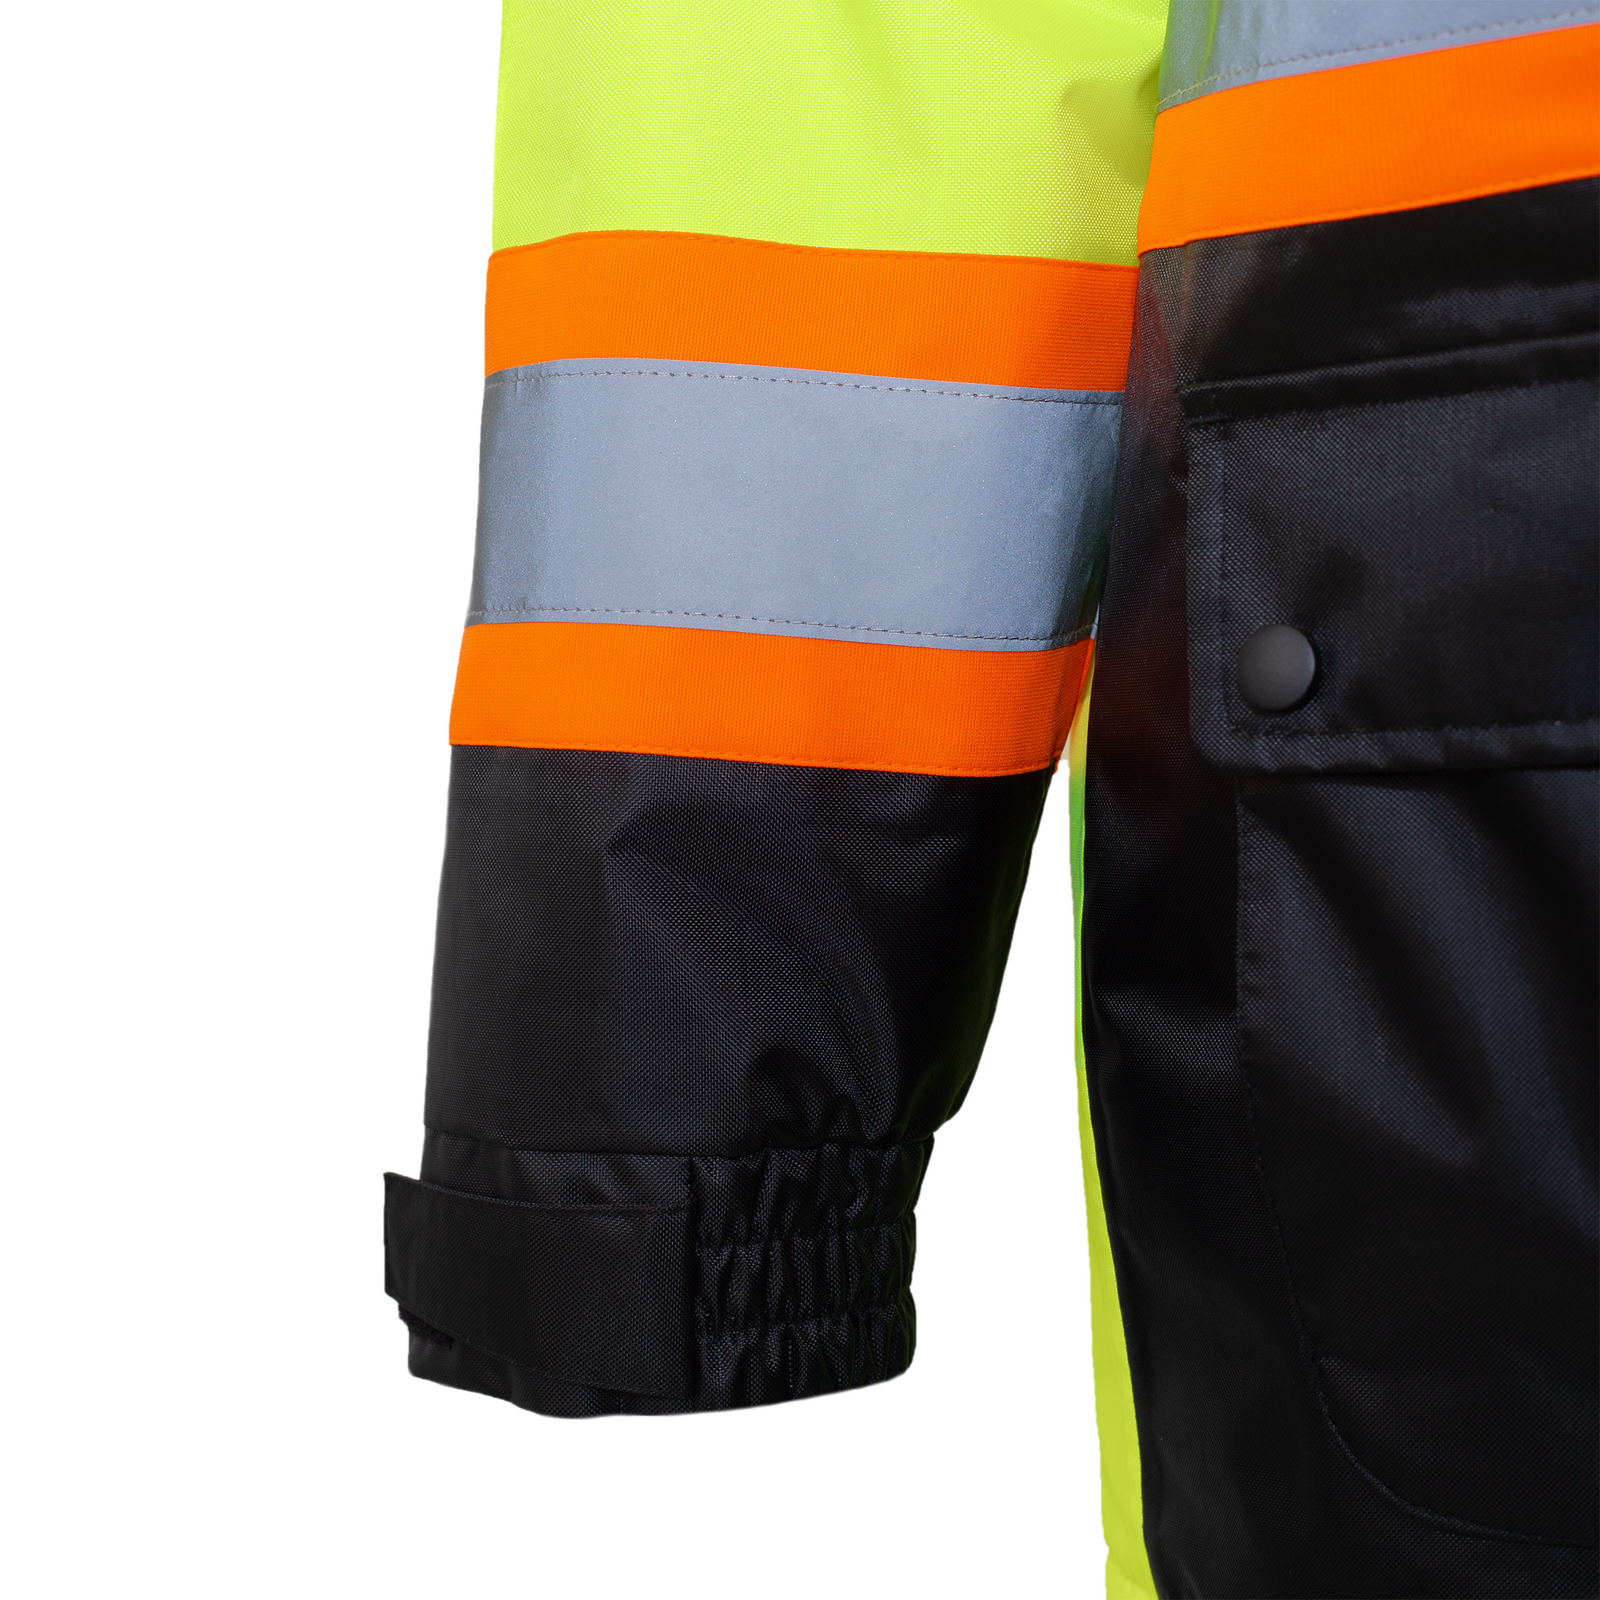 Detail of the elastic cuff, the 2 tone reflective material and the waist pocket of the JORESTECH insulated safety jacket